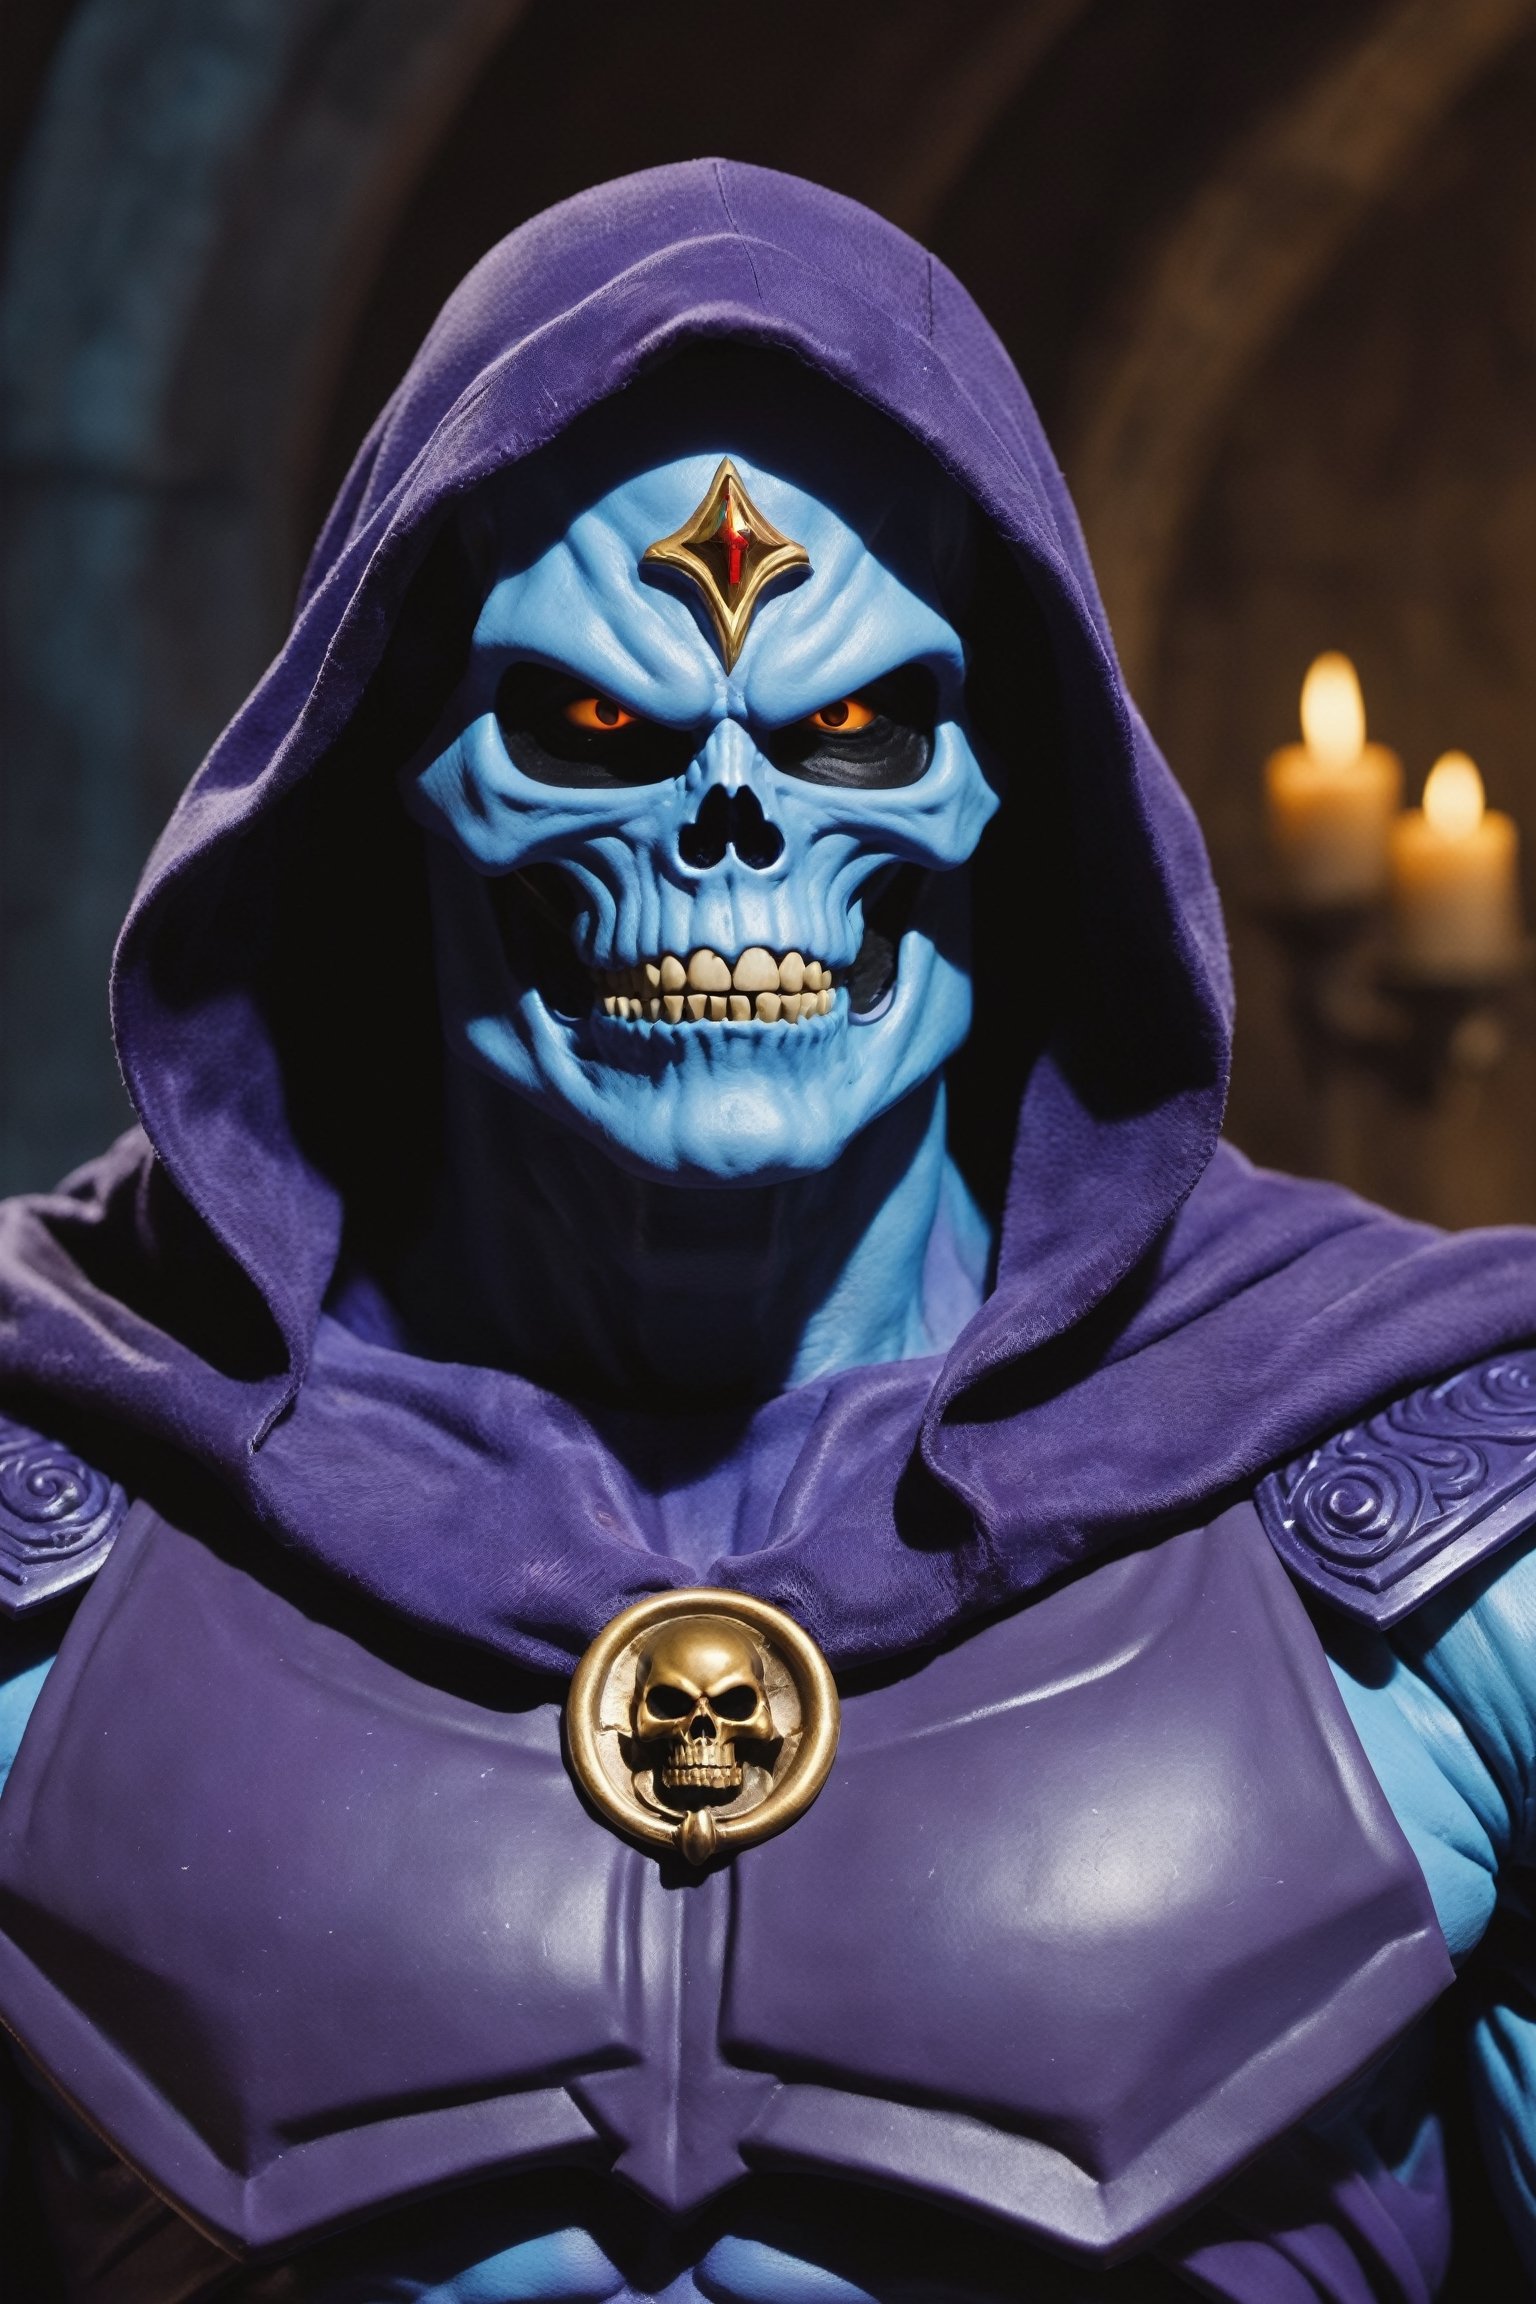 A cosmic malevolence personified, Skeletor's muscular form is enhanced by dark sorcery. Draped in an otherworldly cloak adorned with cosmic symbols, his exposed skull gleams with an unnatural, ethereal glow. Skeletor's mastery of dark magic and his command of Castle Grayskull's secrets make him a formidable force against the forces of good.